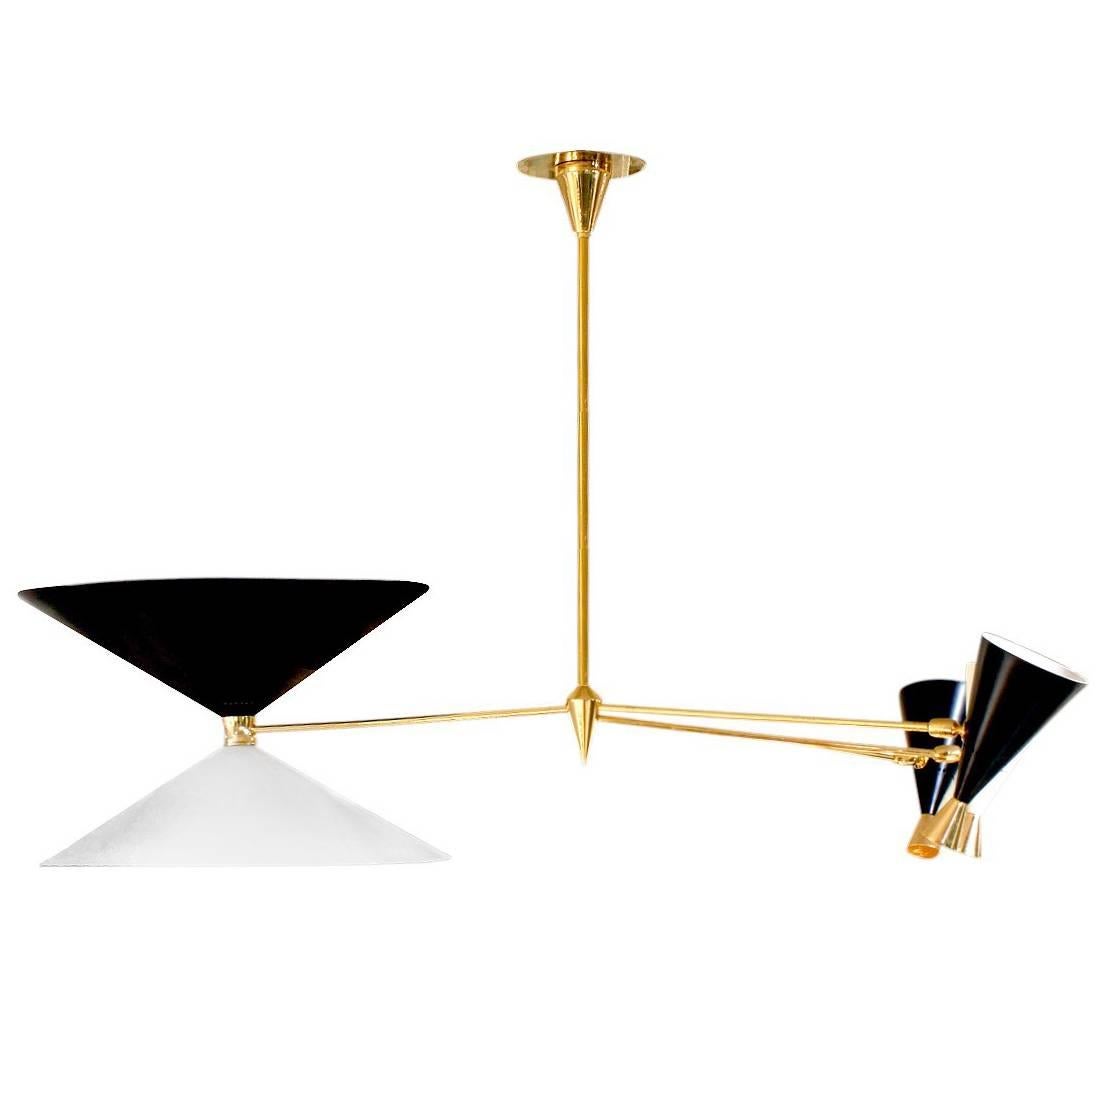 Arredolce Chandelier in Polished Brass with Conical Shades, 1953